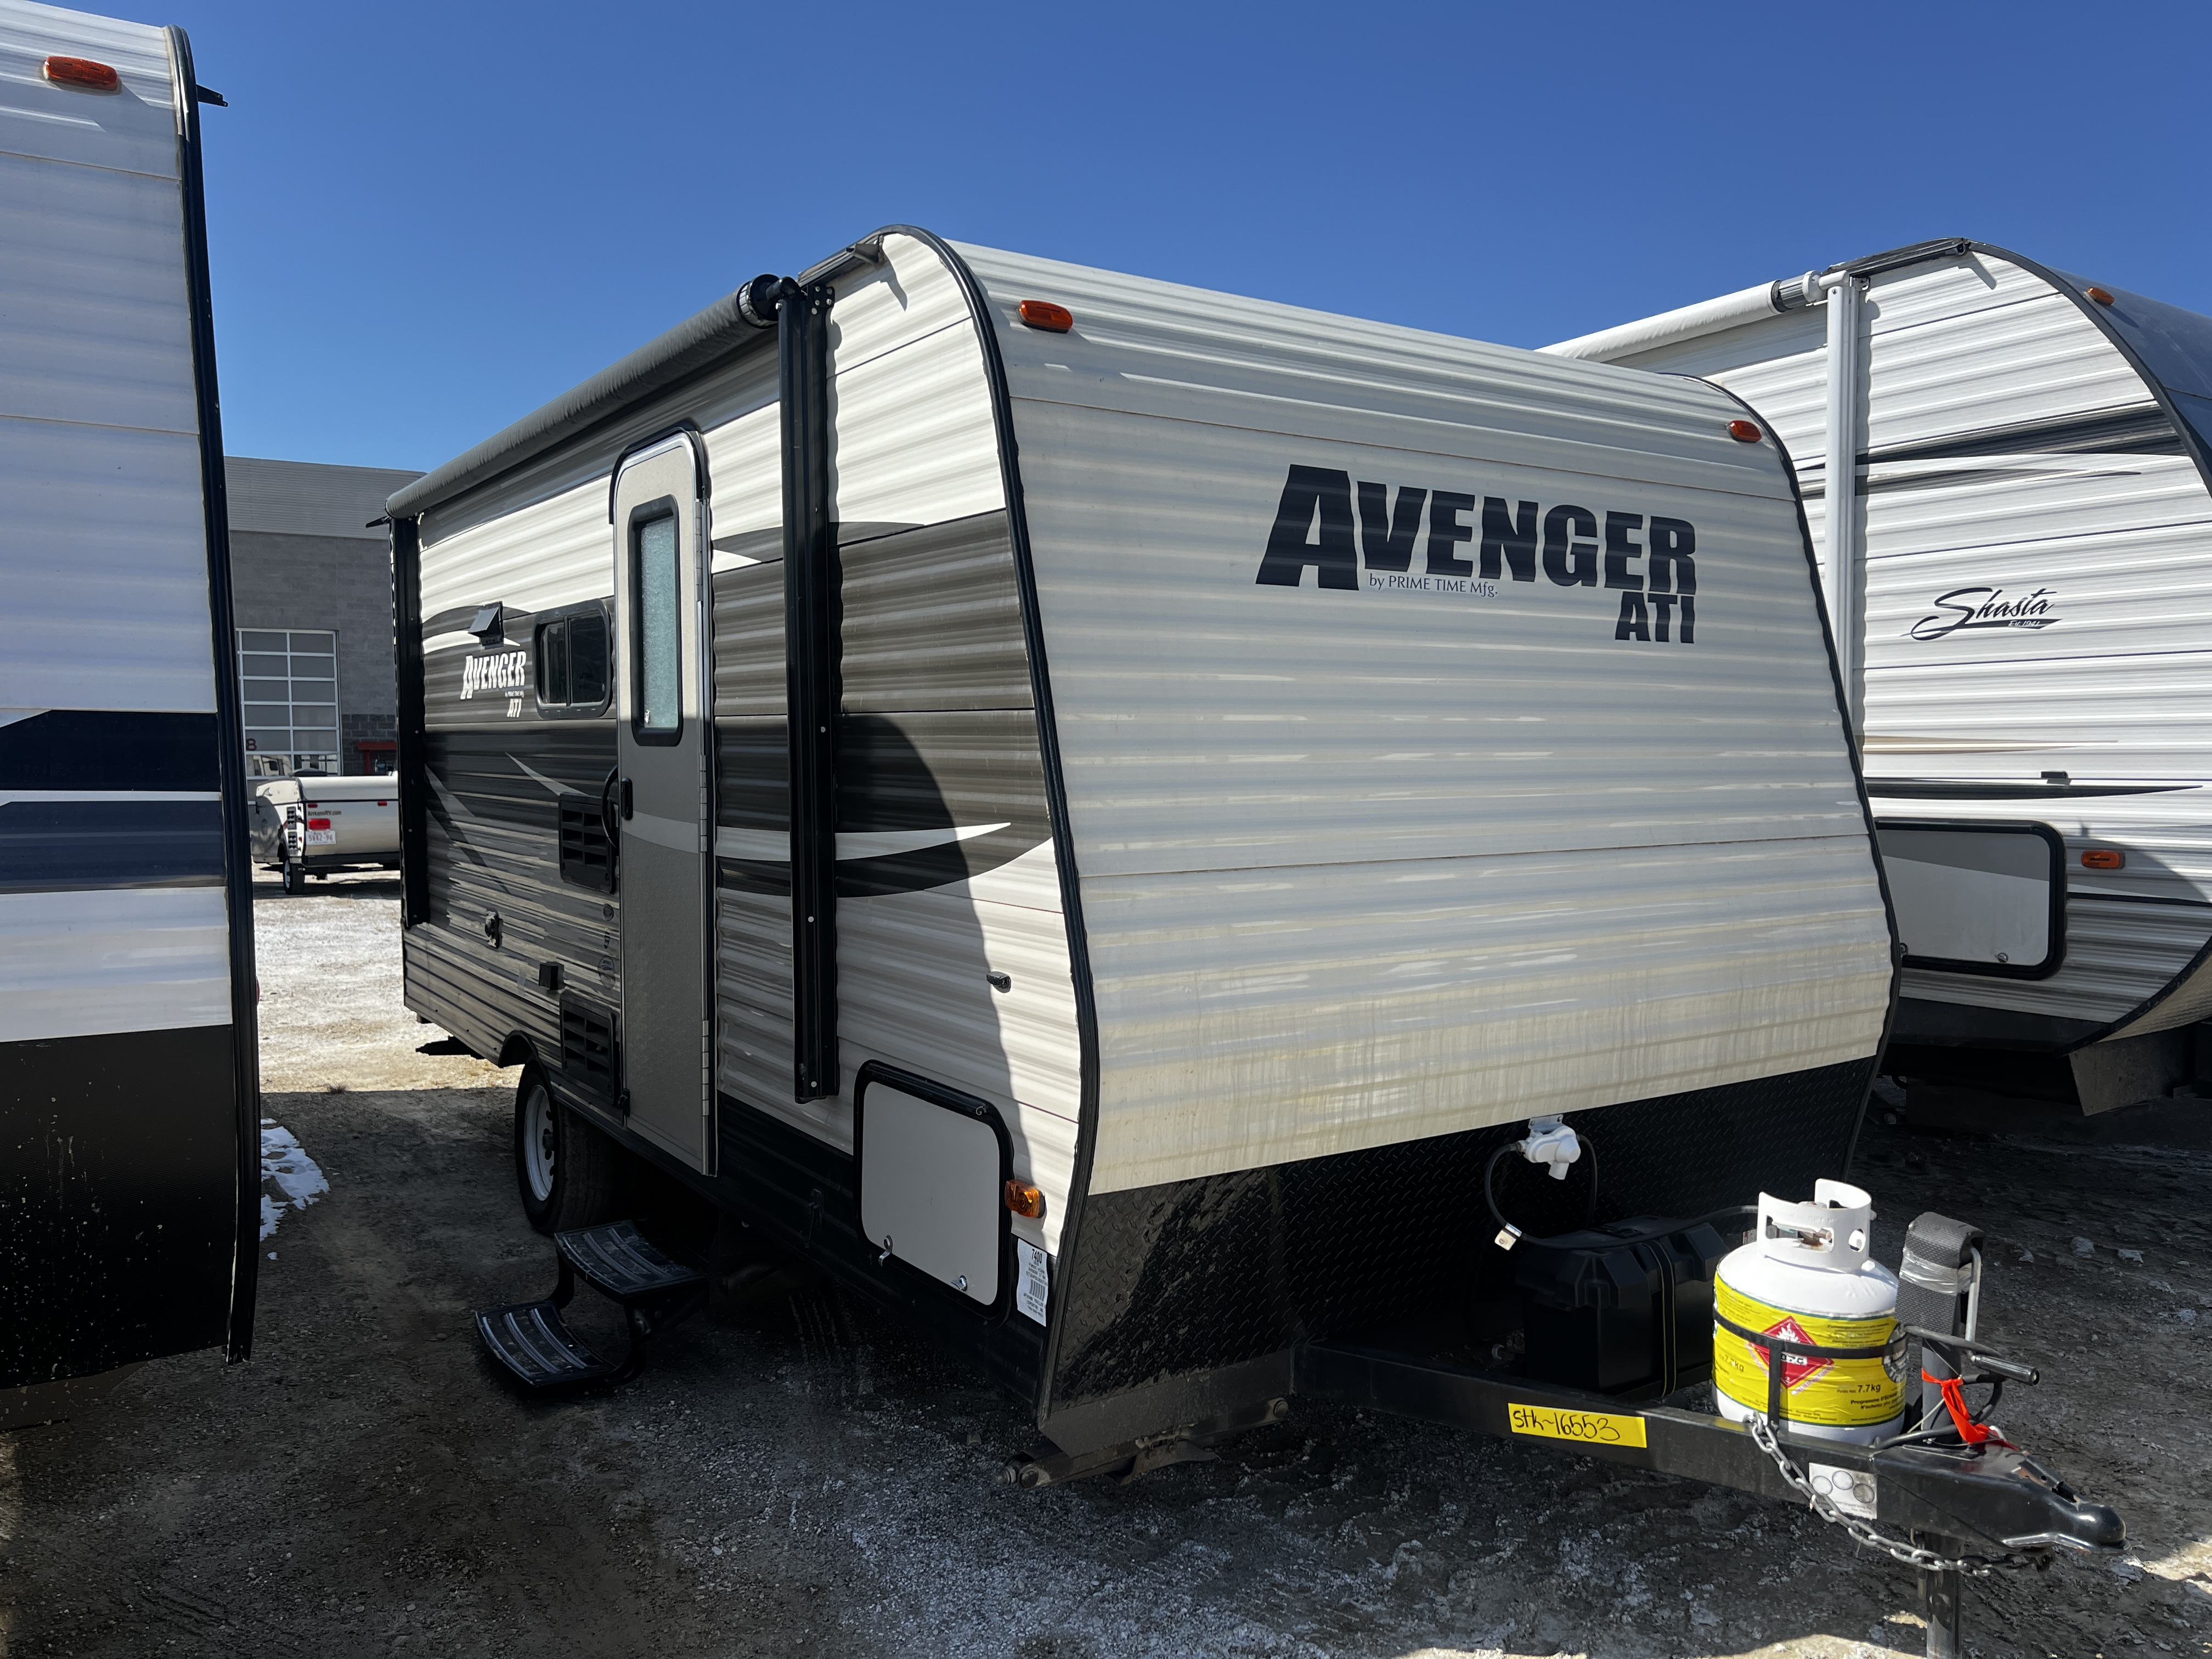 USED 2018 Forest River AVENGER 17 BH